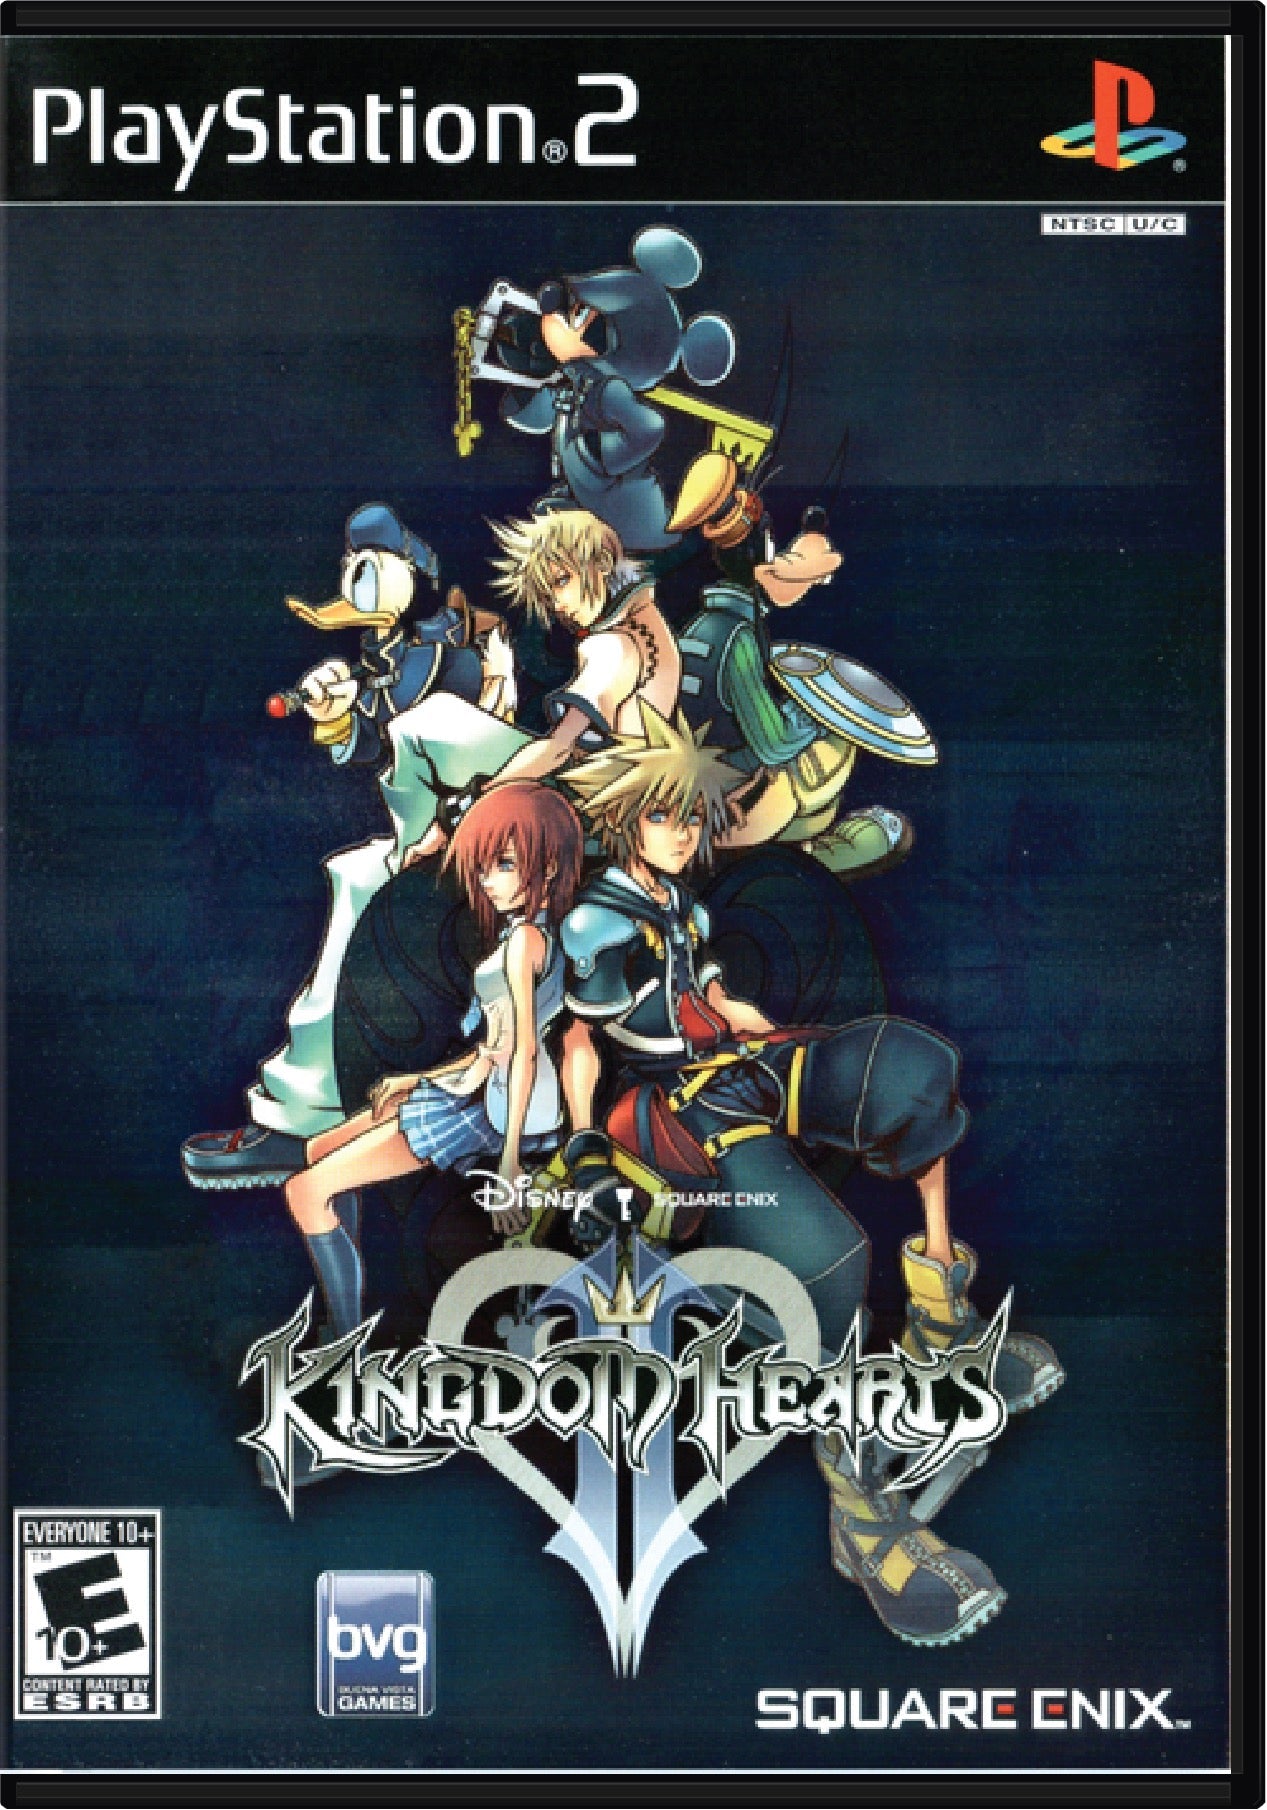 Kingdom Hearts 2 Cover Art and Product Photo